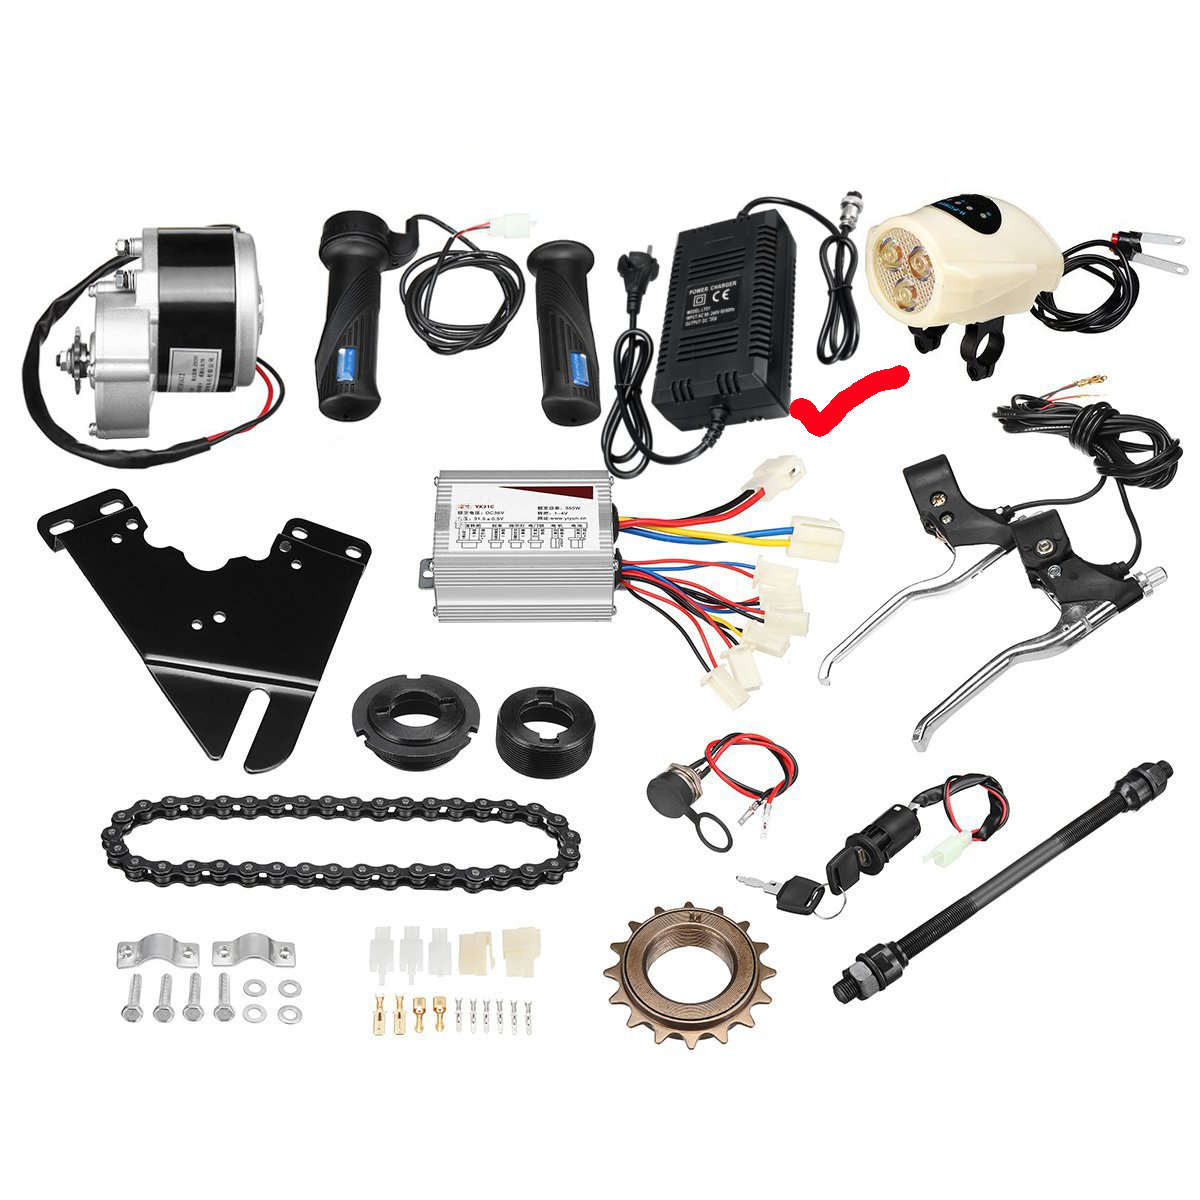 

36V 250W Motorized Electric Bike Motor Controller with Charger E-Bike Scooter Conversion Kit